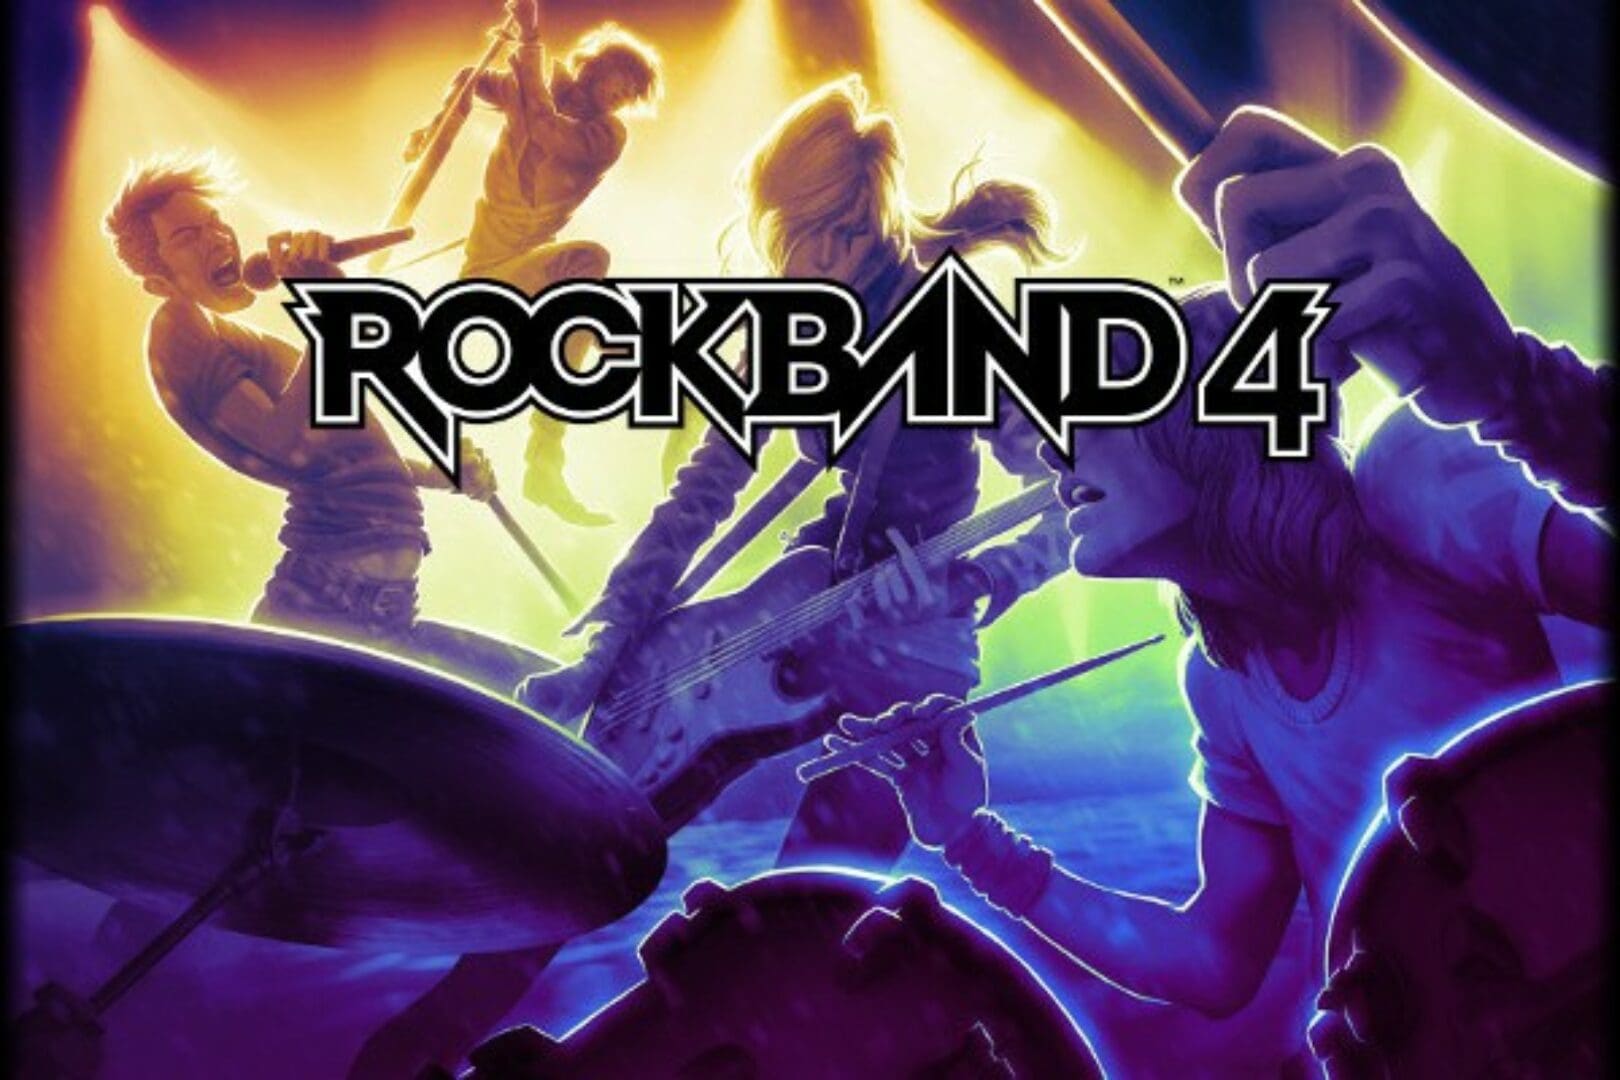 Rockband 4 Adds 17 New Songs To Its Setlist